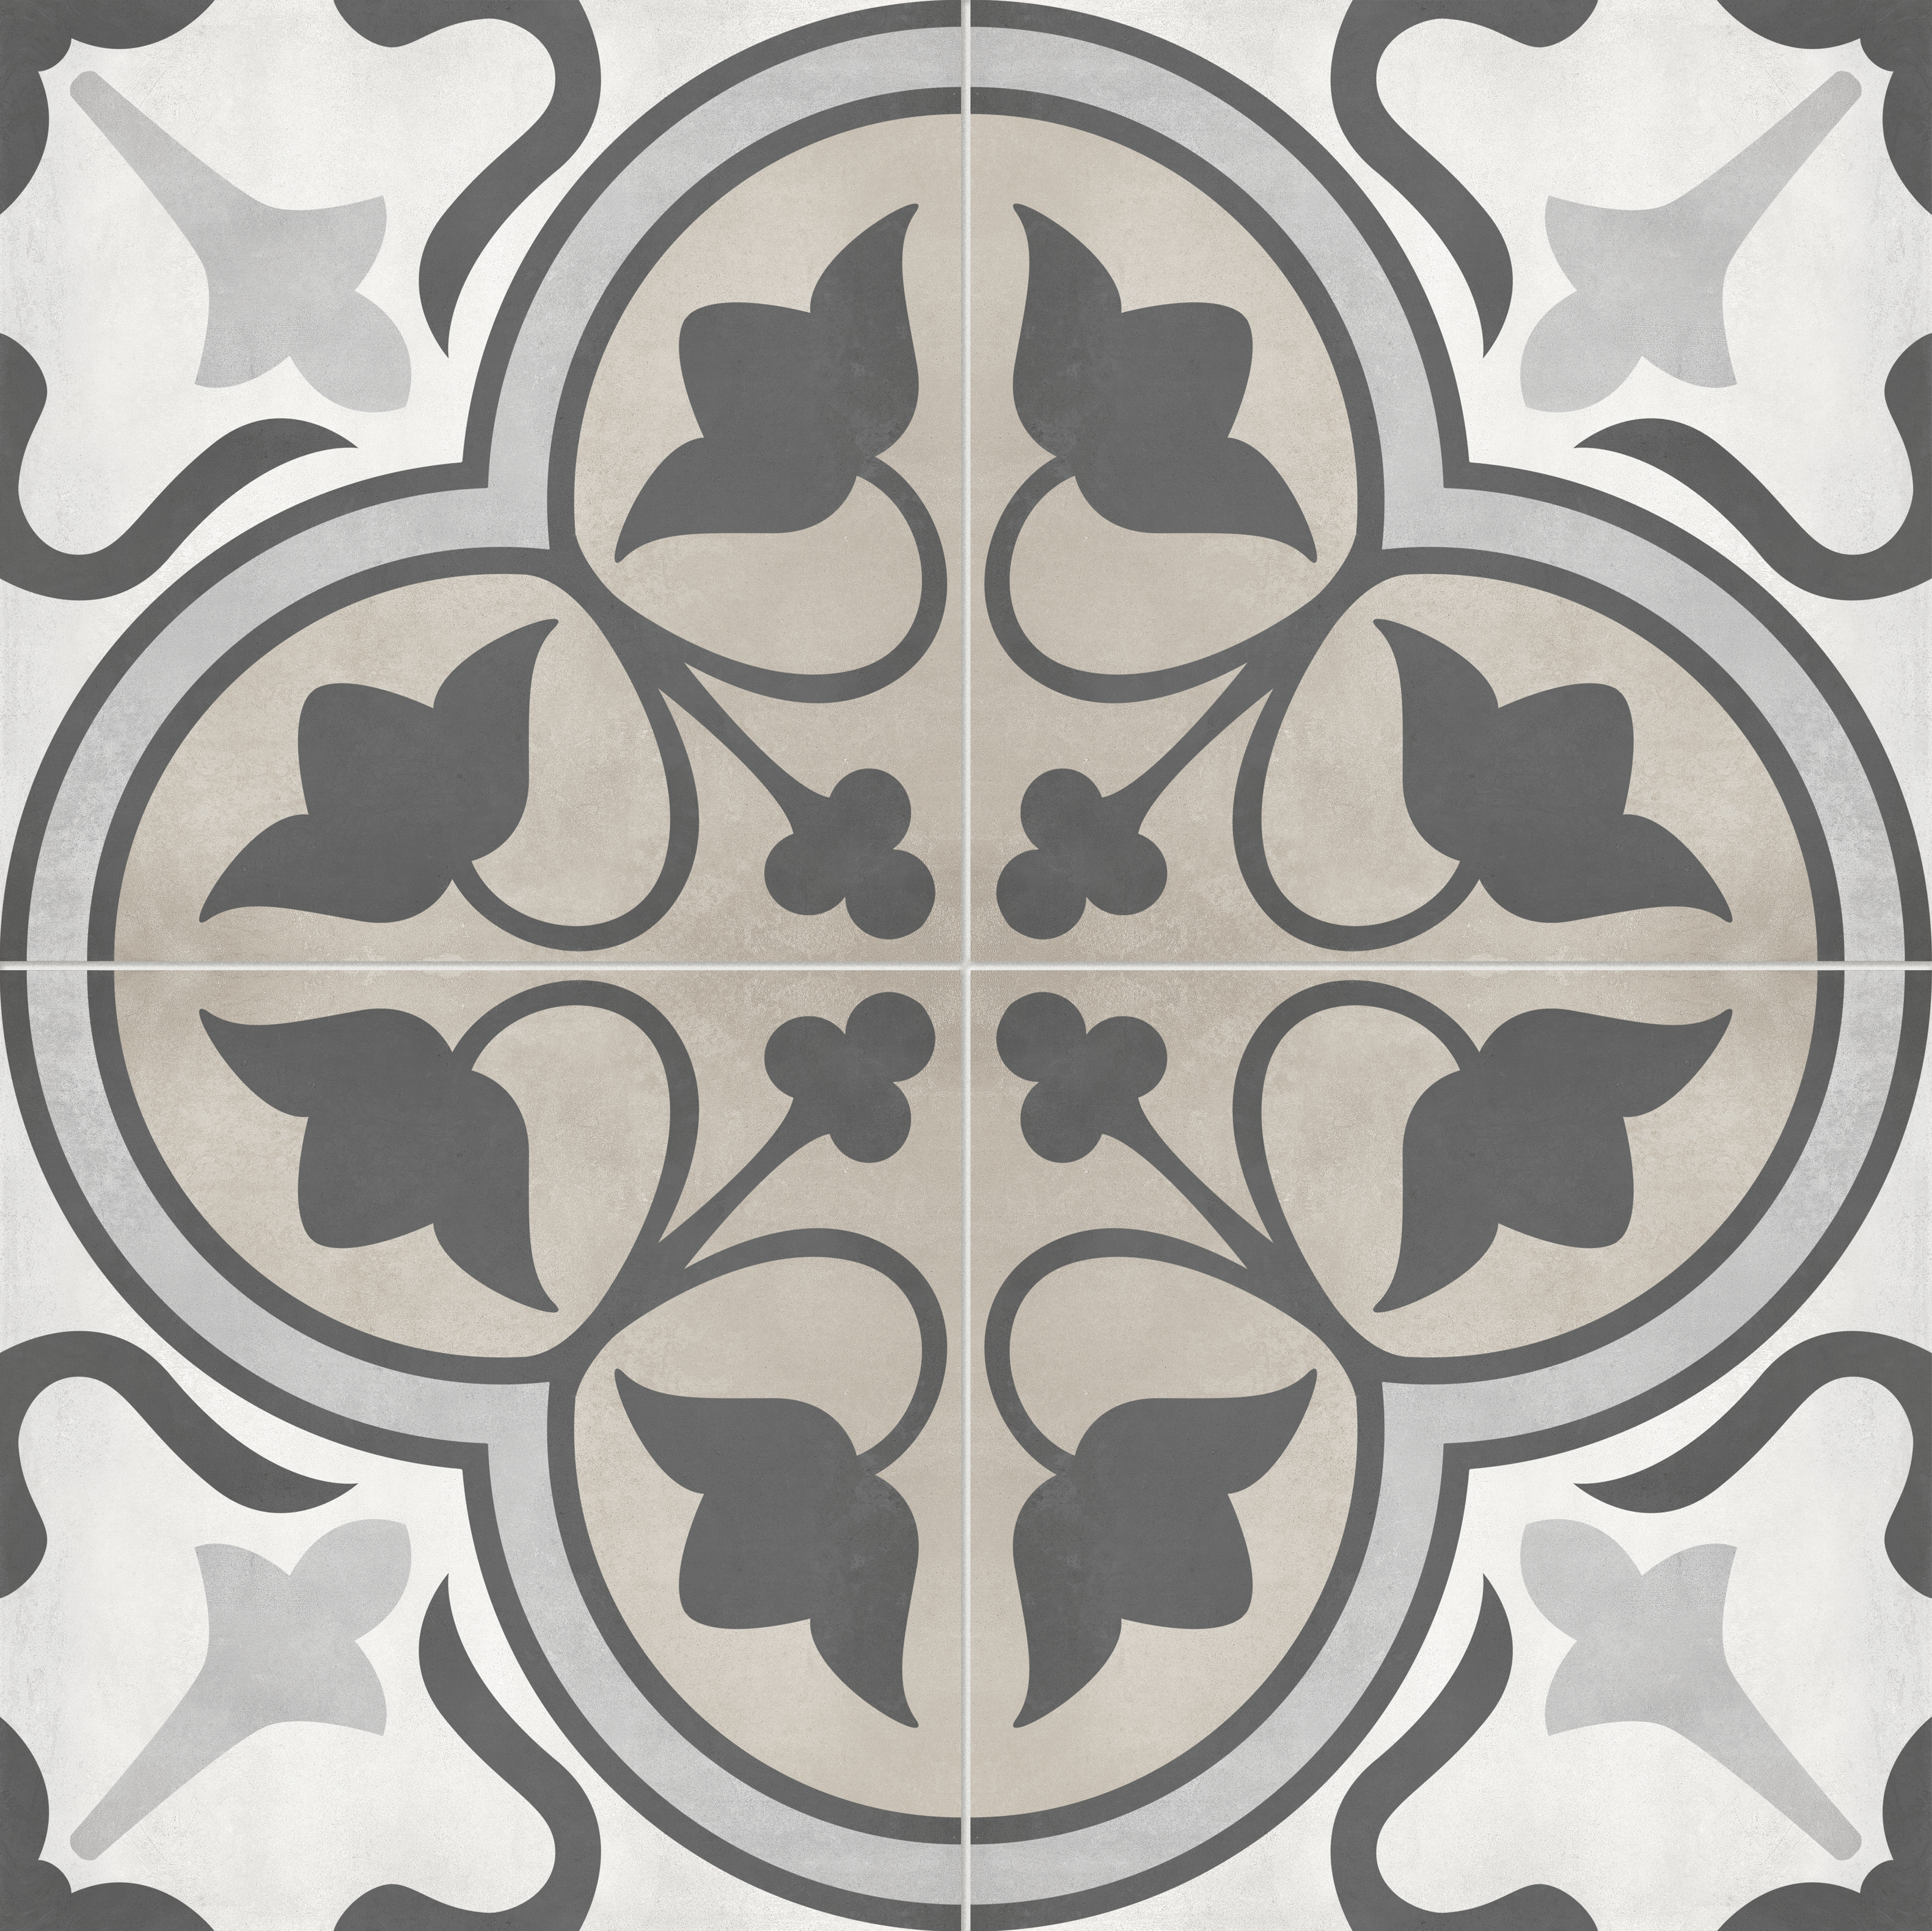 sand print pattern glazed porcelain deco tile print blend from form anatolia collection distributed by surface group international matte finish pressed edge 8x8 square shape